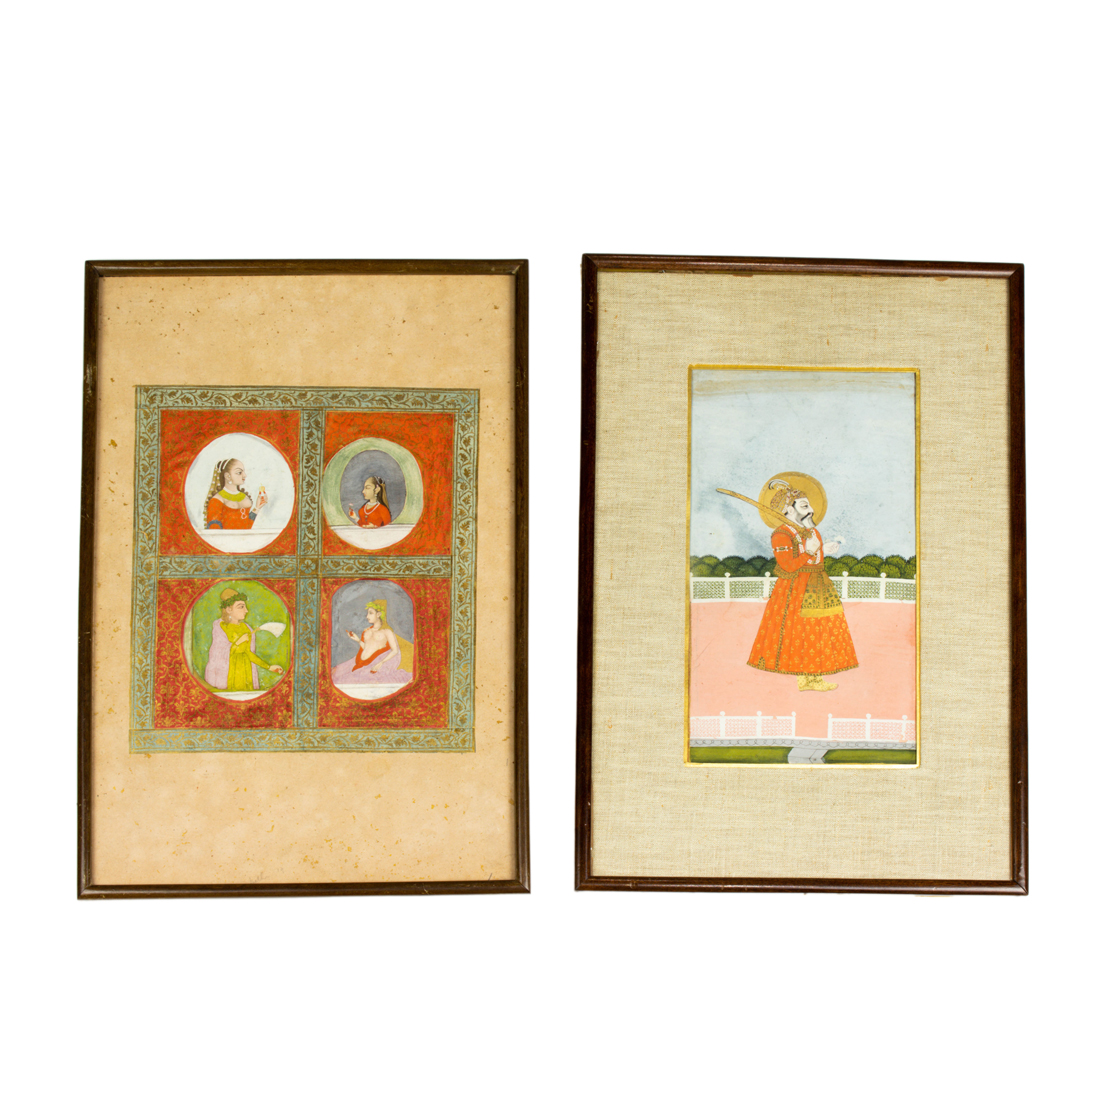  LOT OF 2 INDIAN MINIATURE PAINTINGS 2d21c4